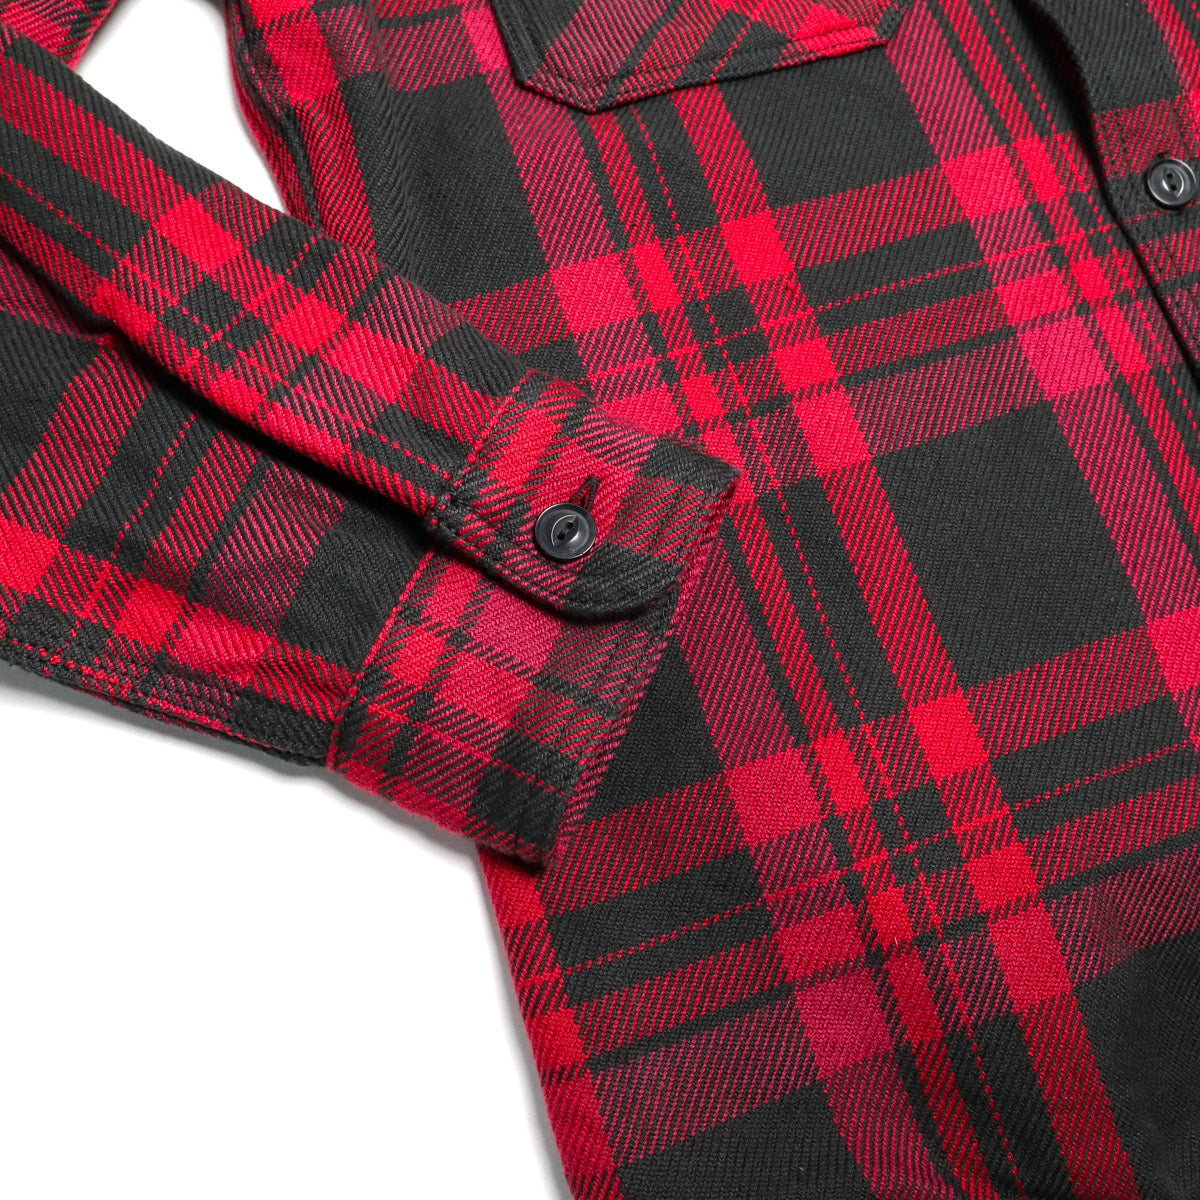 UES 15.5oz Extra Heavy Flannel Shirt Red